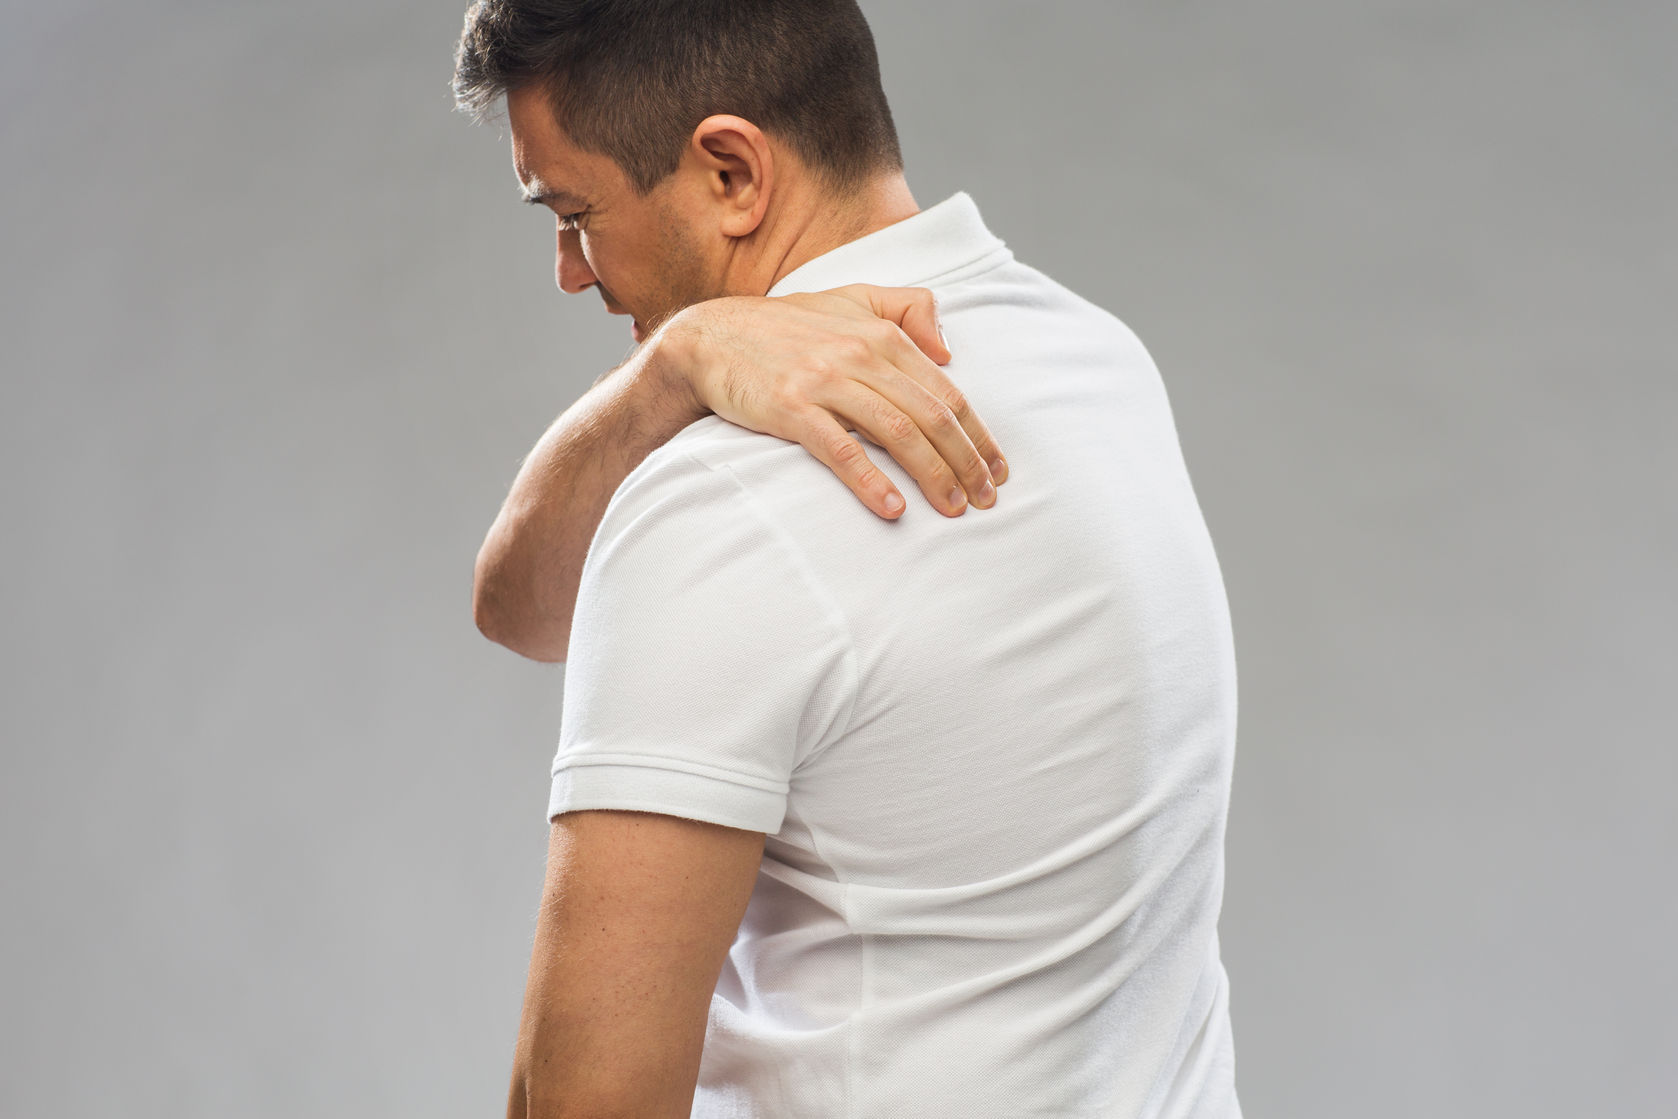 Are You Looking For Neck And Upper Back Pain Relief